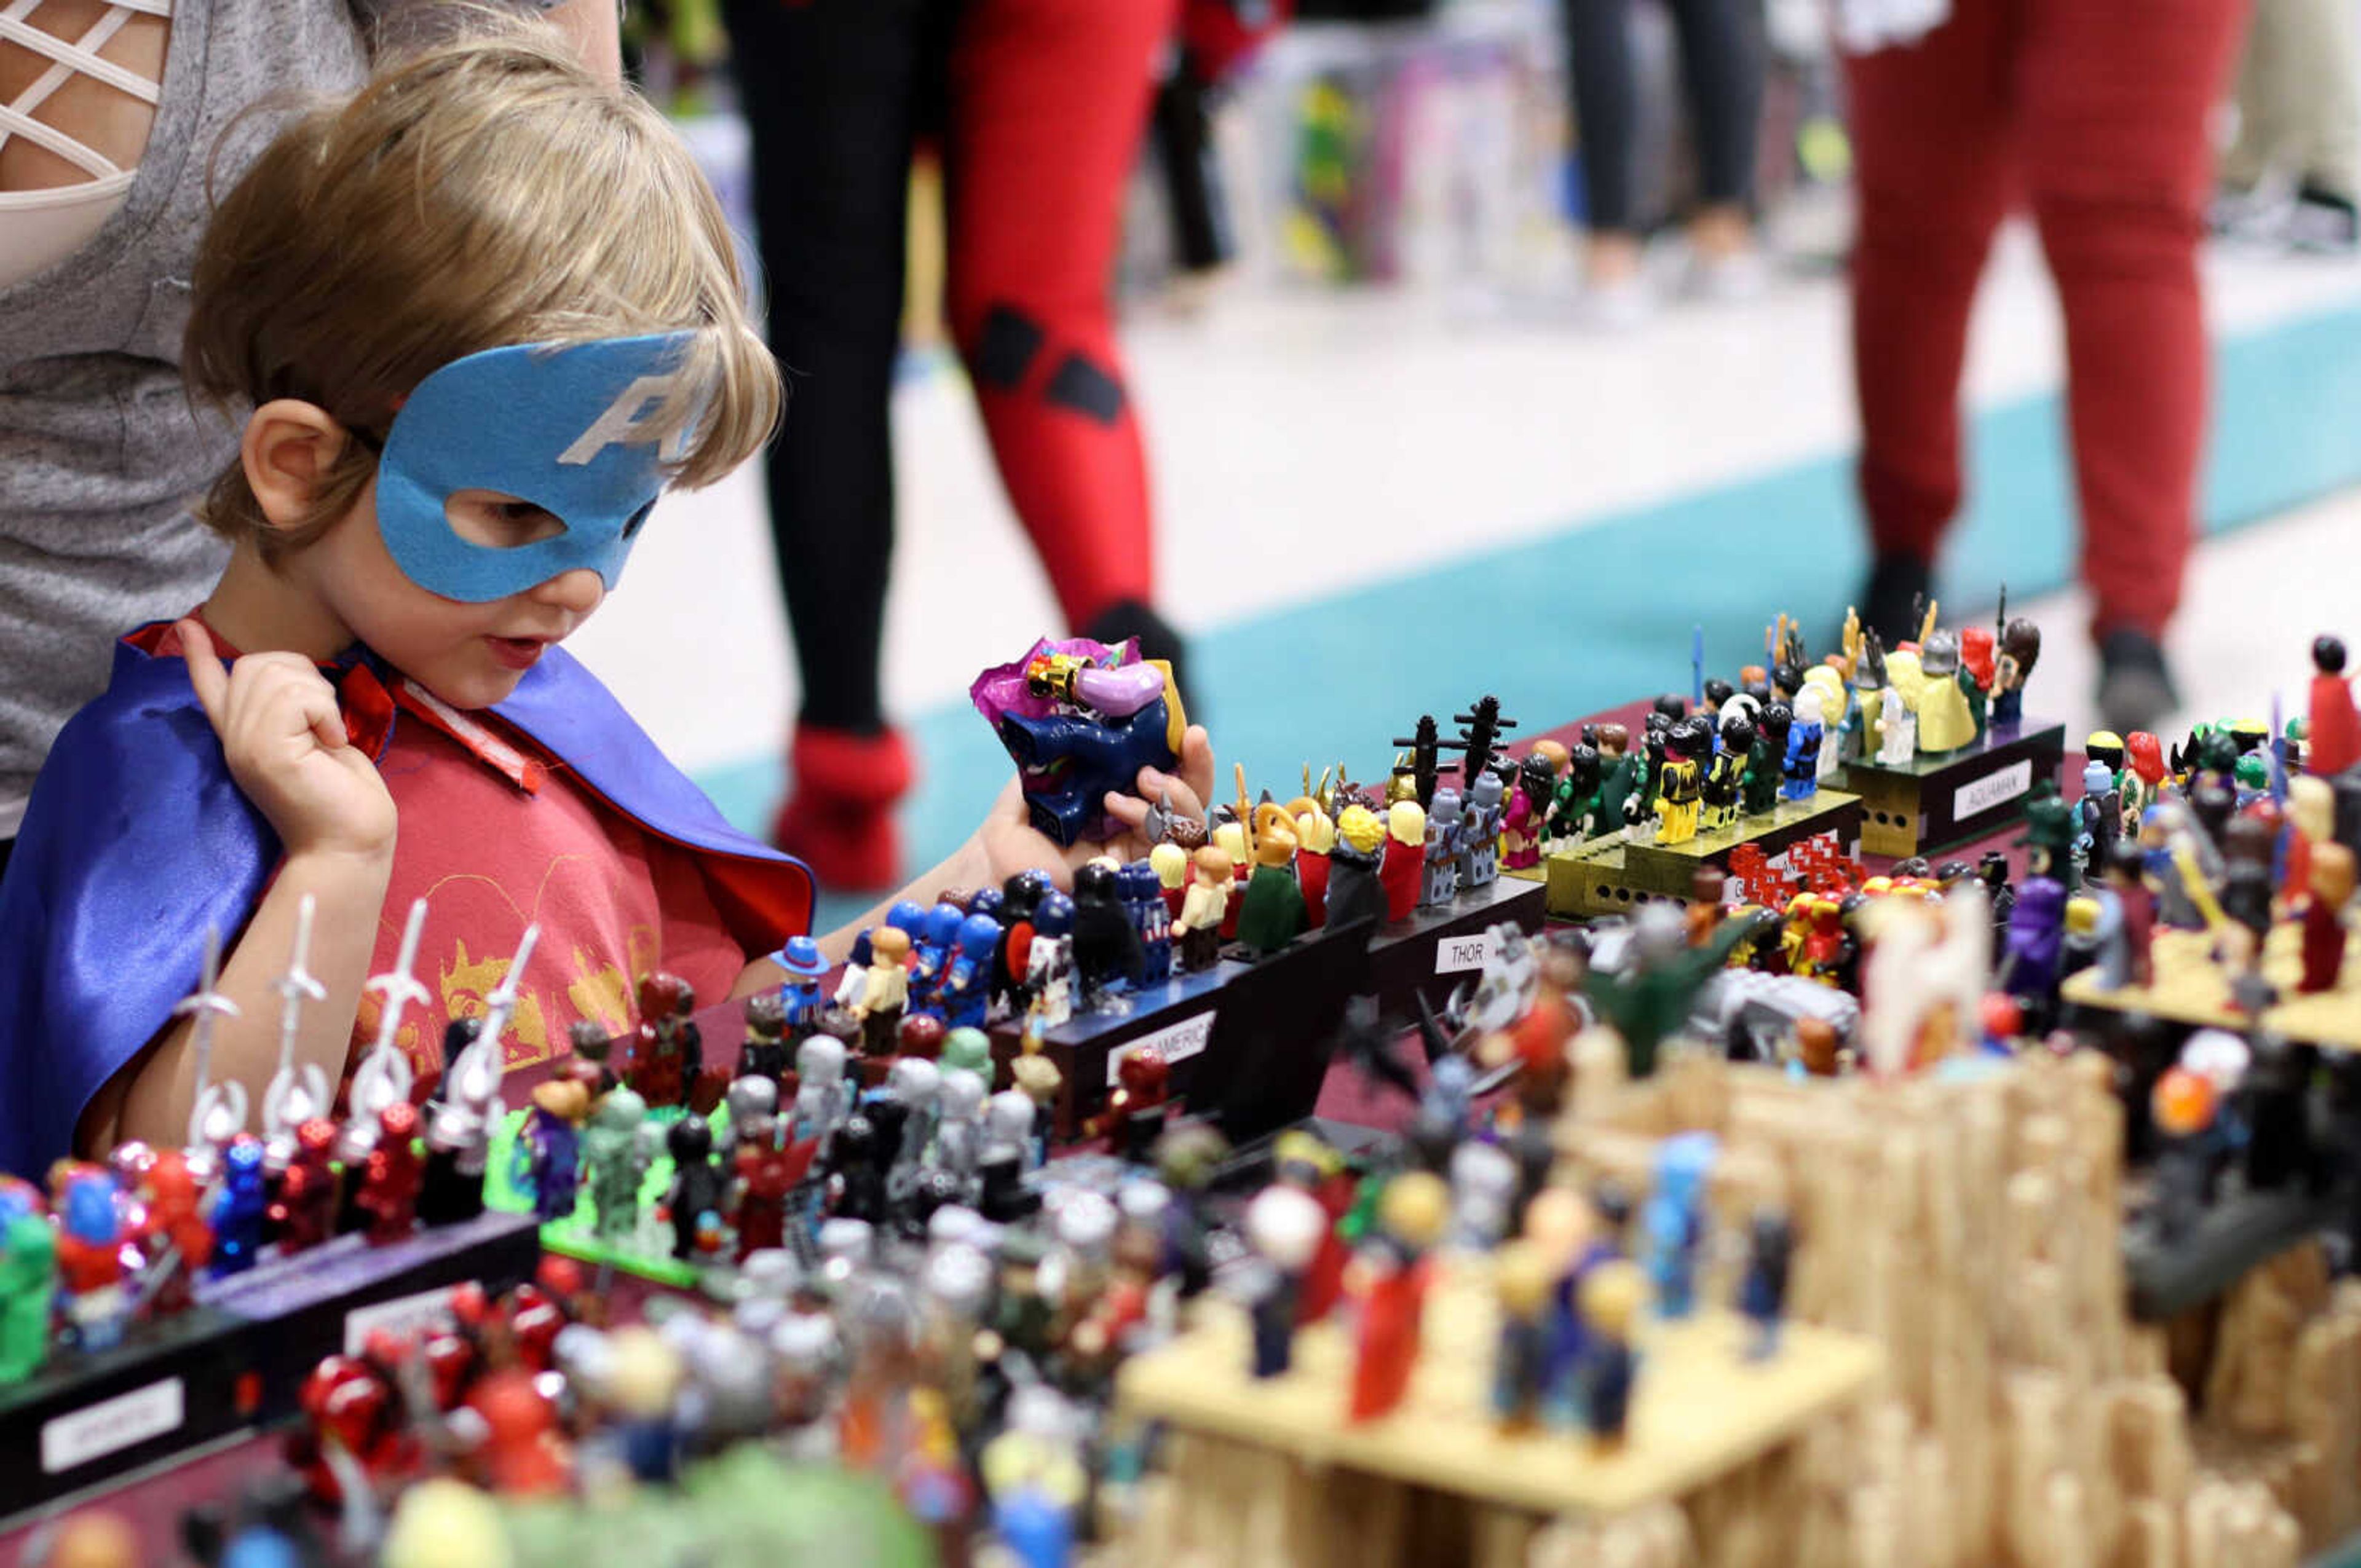 Benhett Powderly, 4, looks at the variety of Lego figures at Cape Comic Con held in the Osage Centre on Friday, April 26.